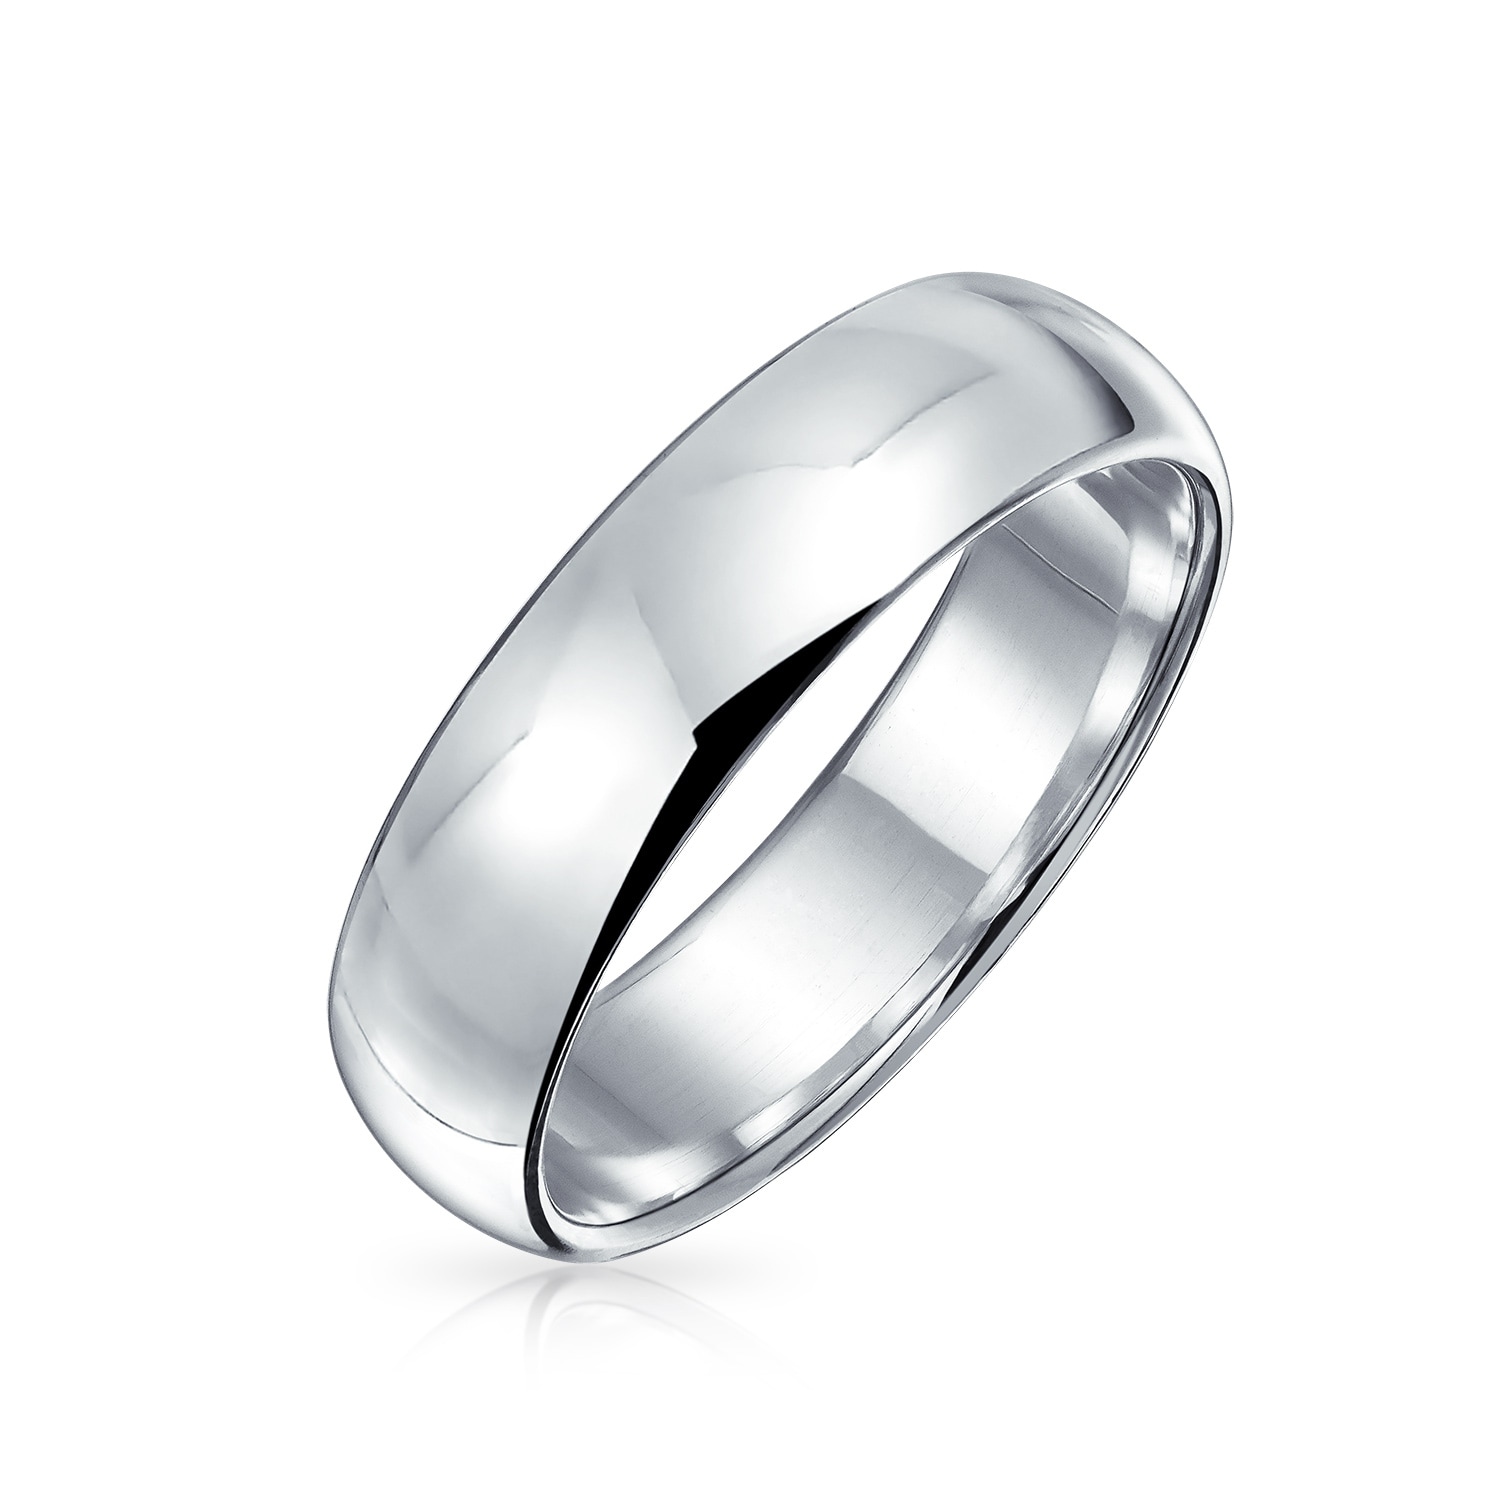 Sterling Silver 925 Wedding Band Ring Mens Solid Comfort Fit Engagement Jewelry